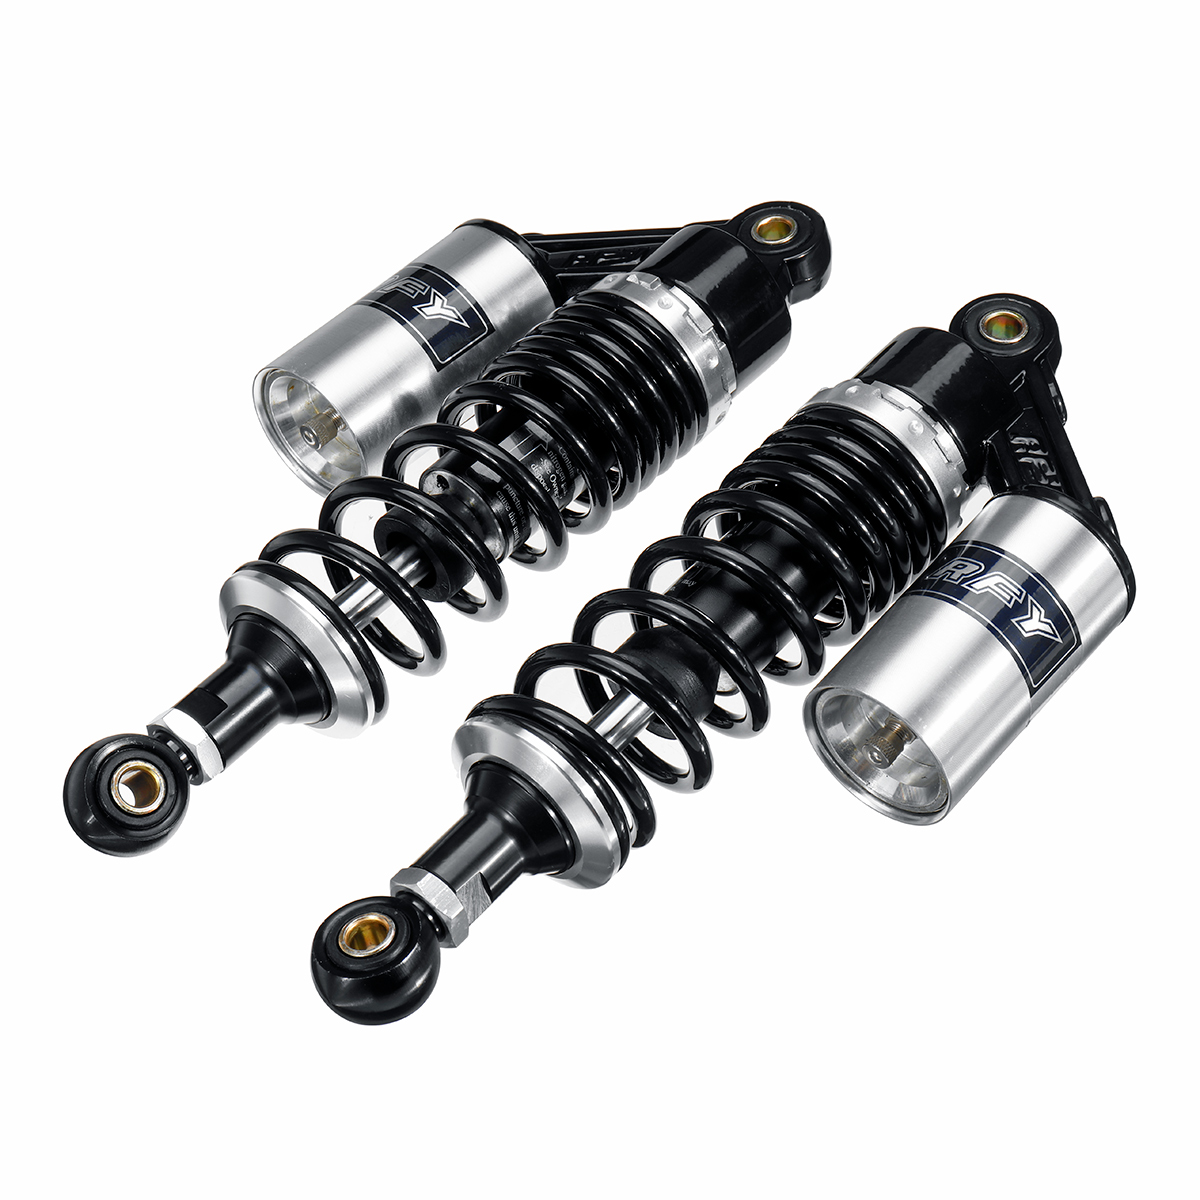 Pair 15inch 380mm Rear Air Shock Absorbers Suspension For ATV Motorcycle Dirt